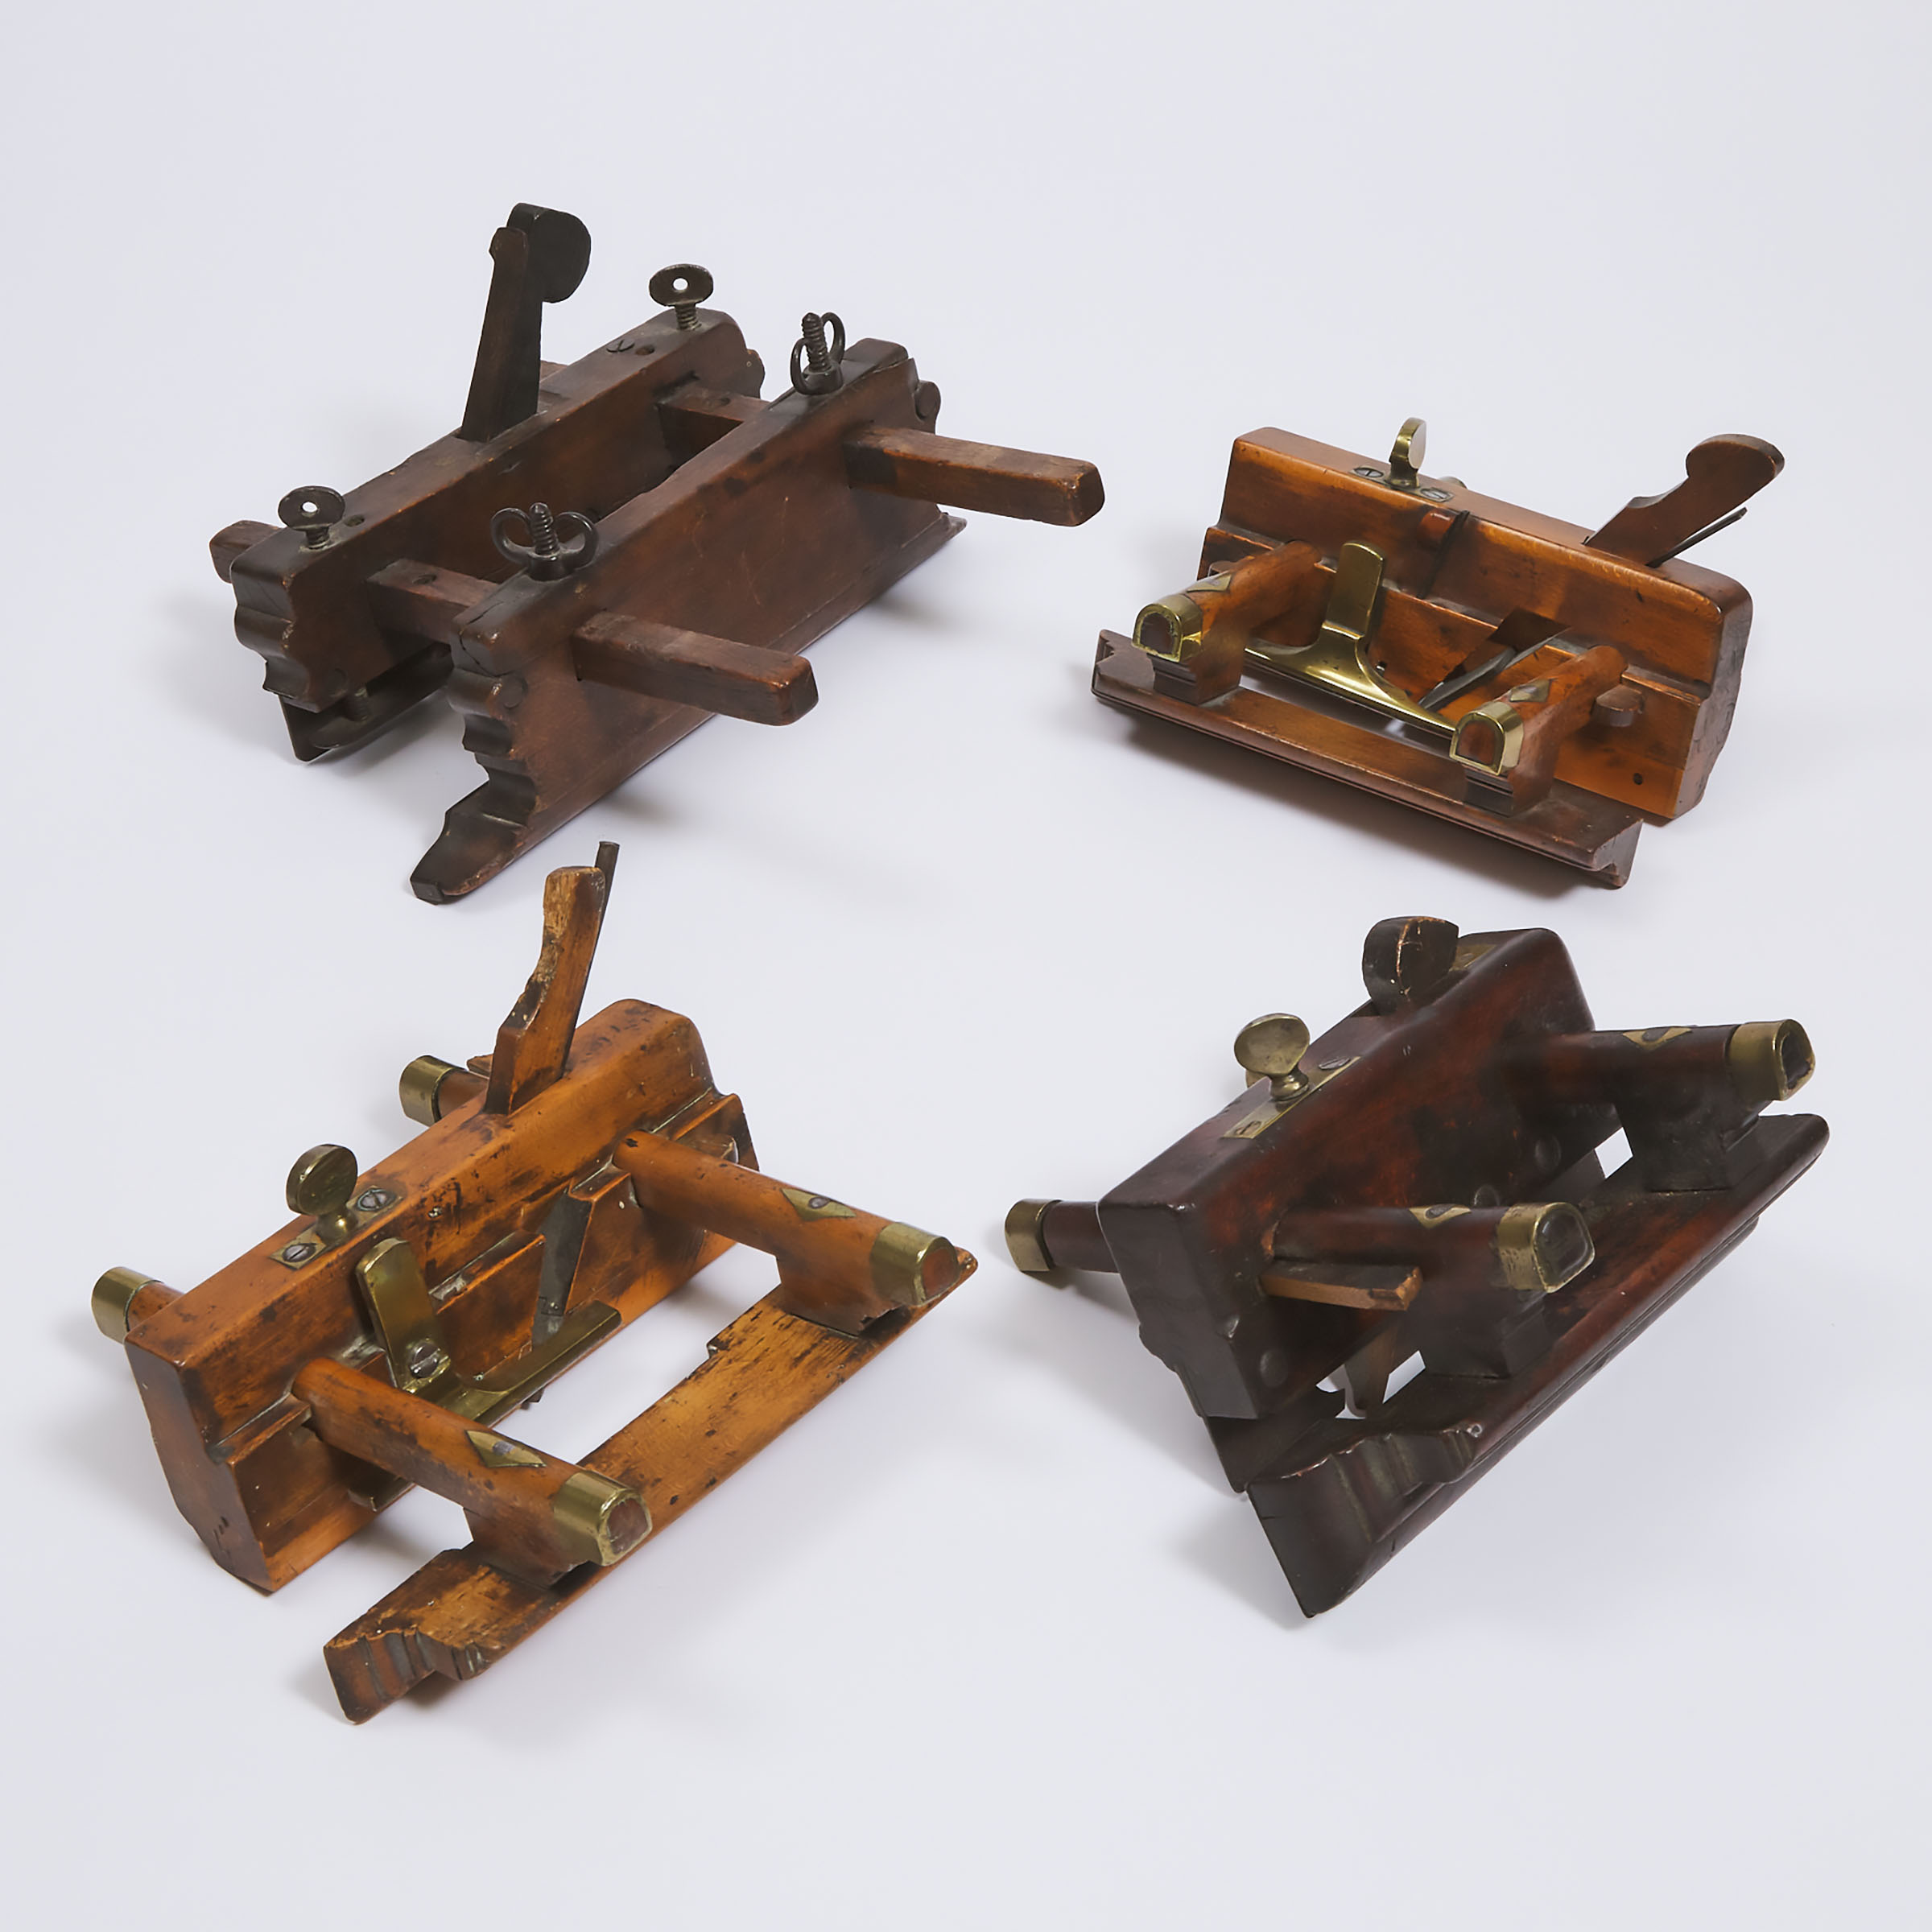 Four Victorian Carpenter's/Joiner's Woodworking Planes, early-mid 19th century